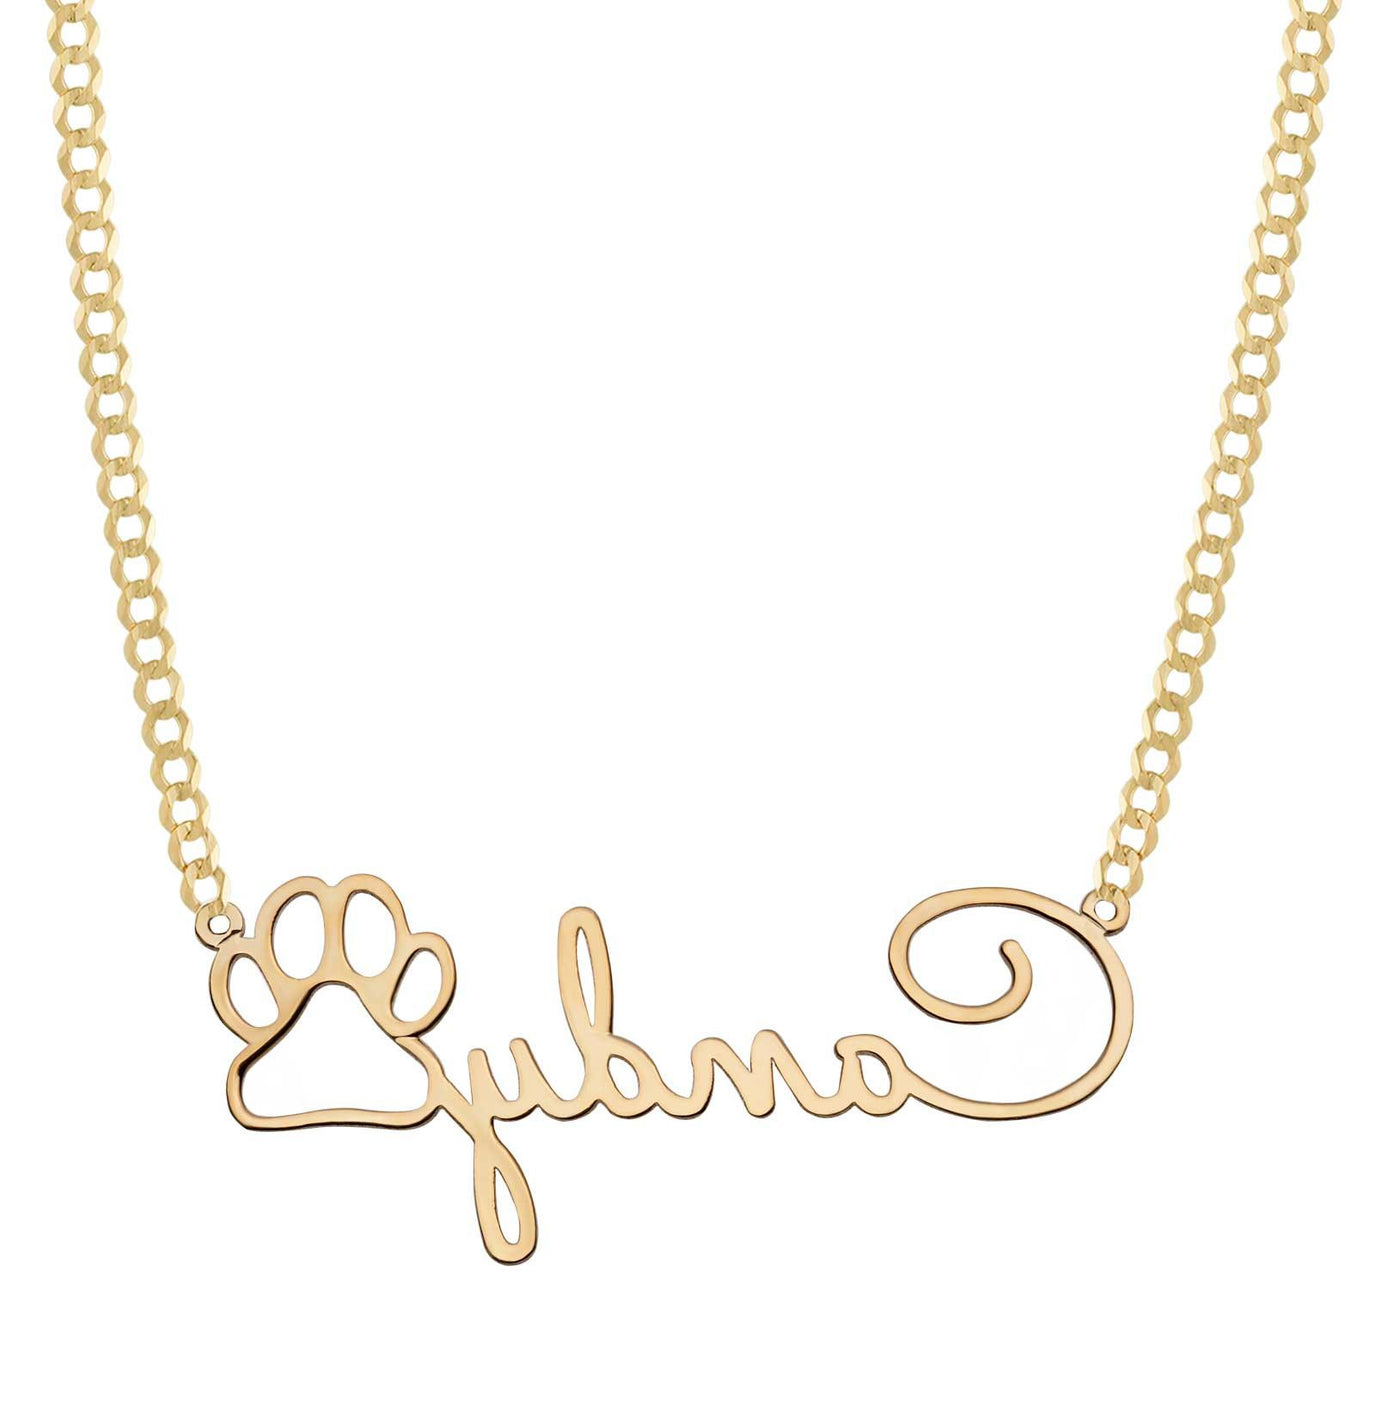 Ladies Paw Name Plate Necklace 14K Gold - Style 142 - bayamjewelry